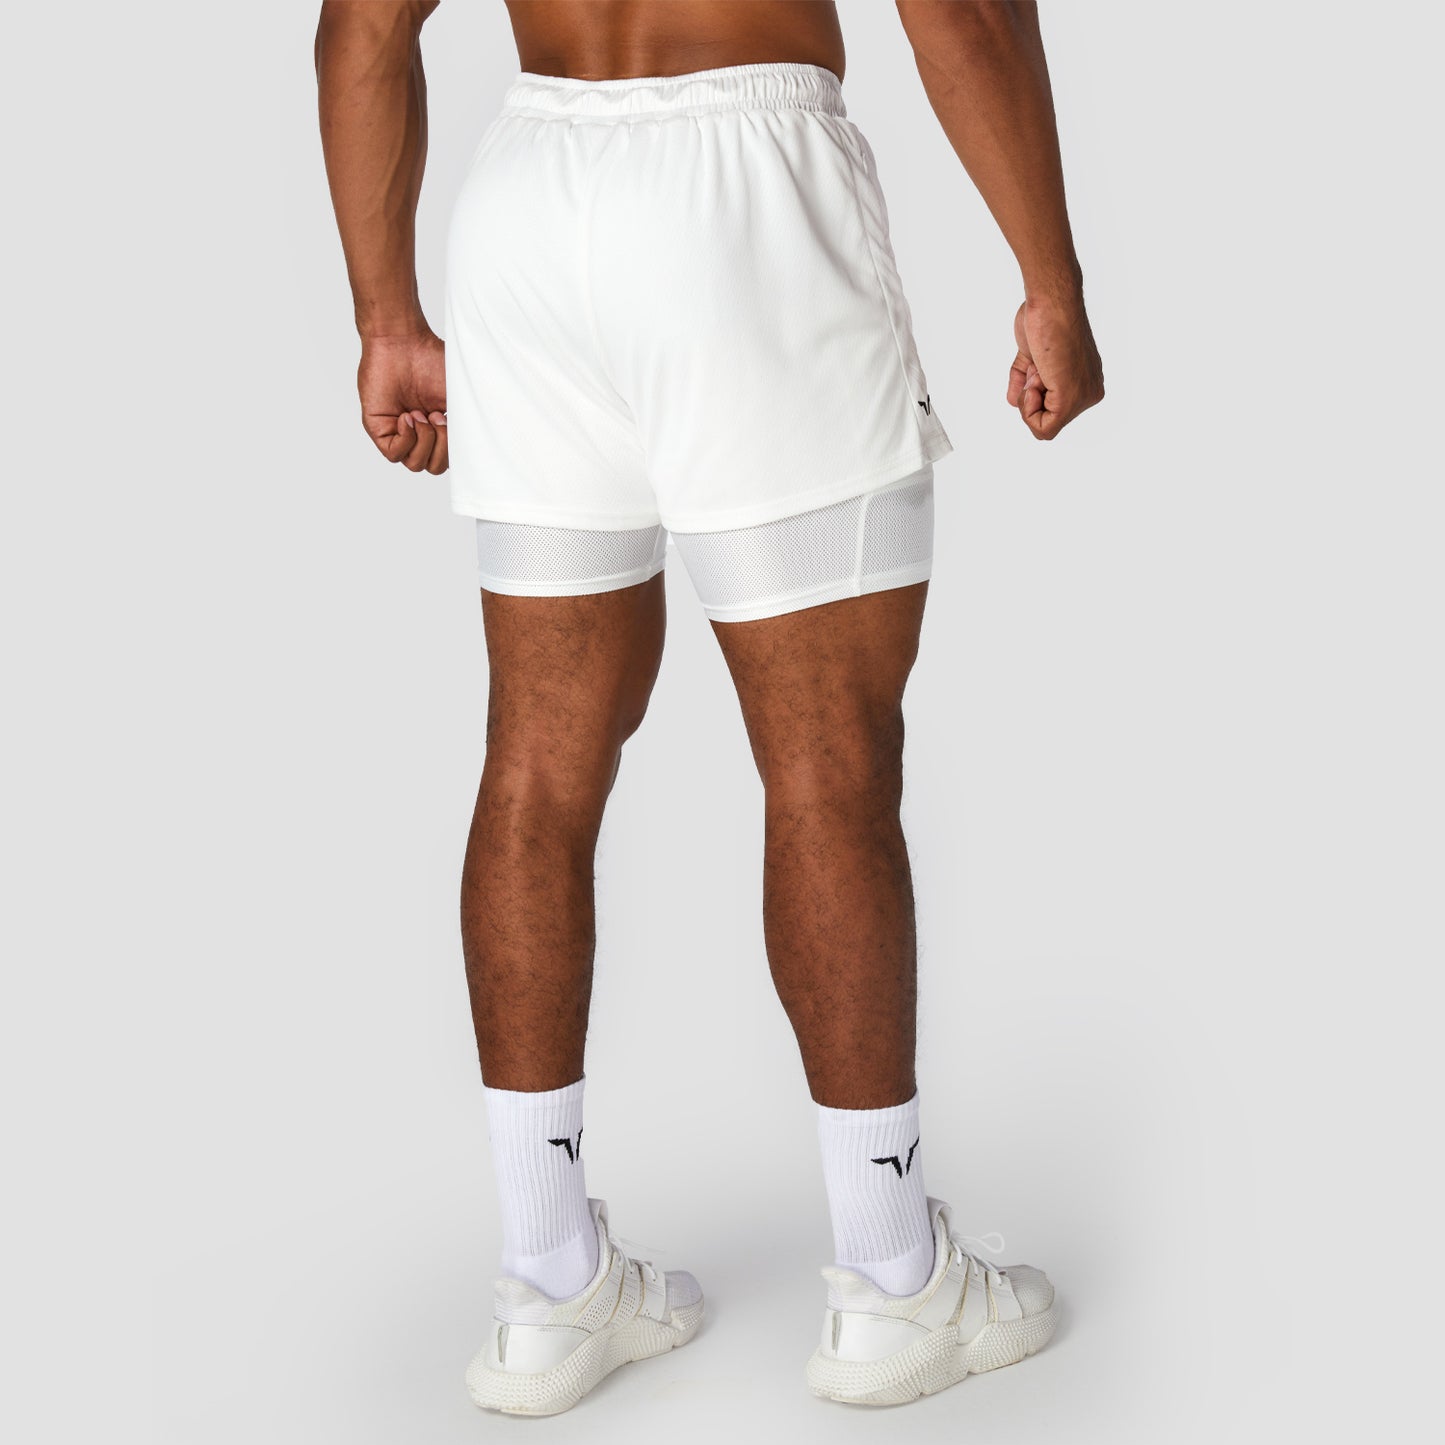 Flux 2-in-1 Shorts - White | Workout Shorts Women | SQUATWOLF